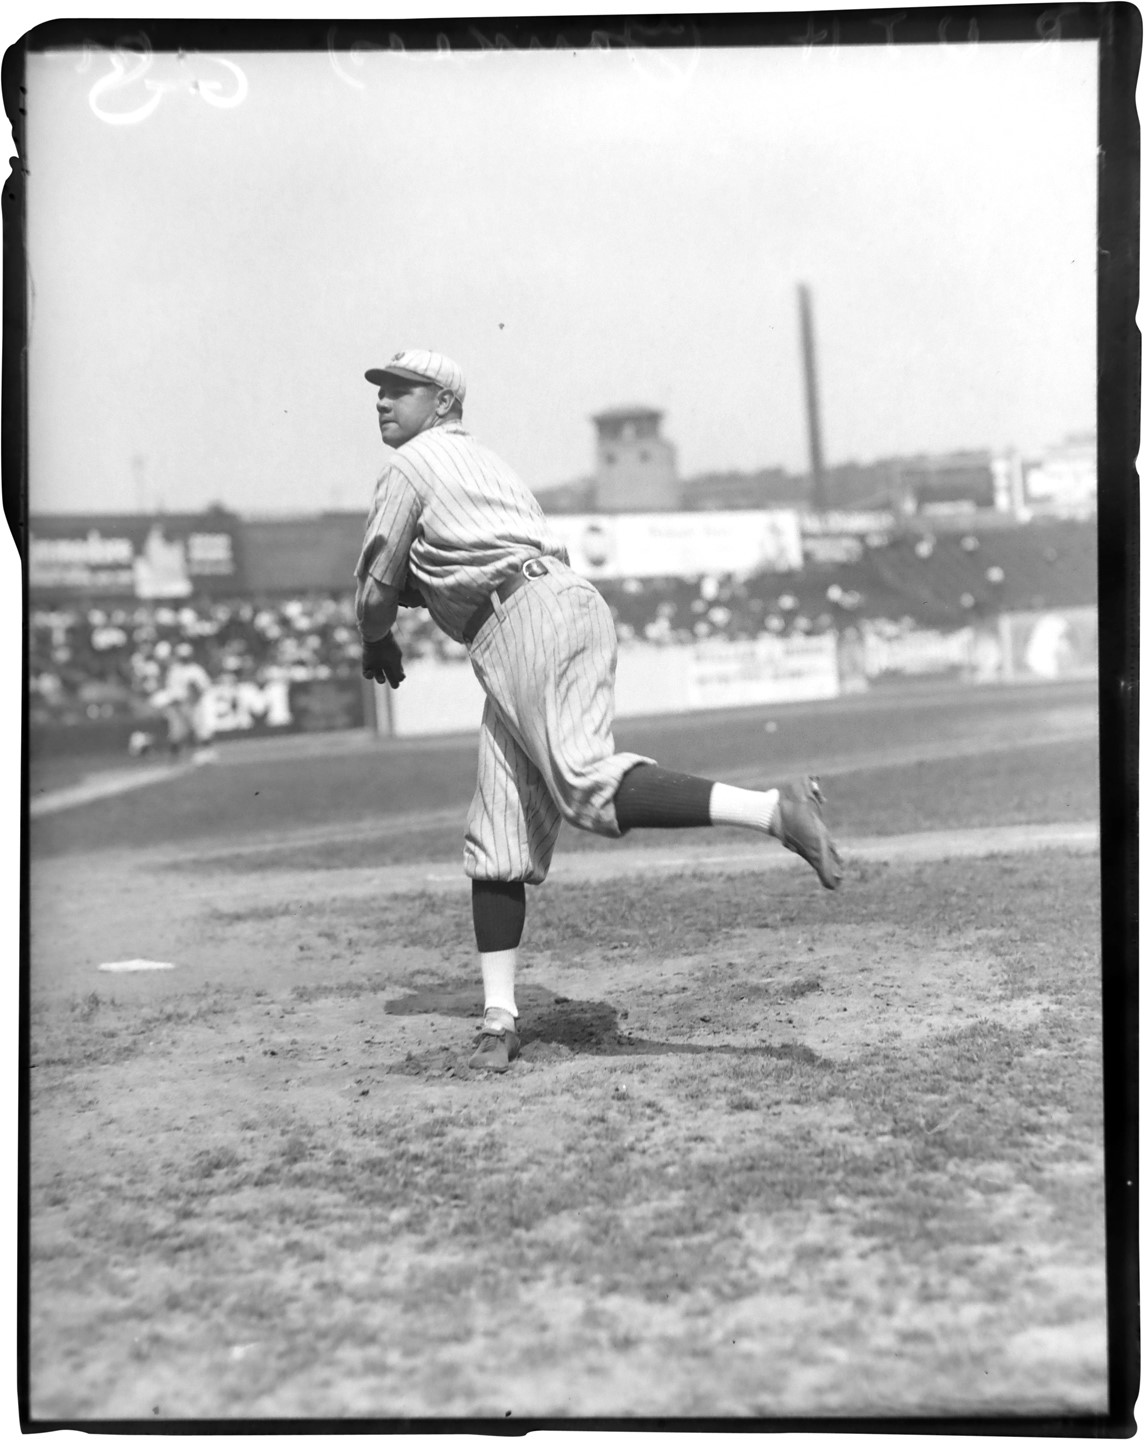 The Brown Brothers Collection - Babe Ruth Pitching for the New York Yankees Glass Plate Negative by Charles Conlon